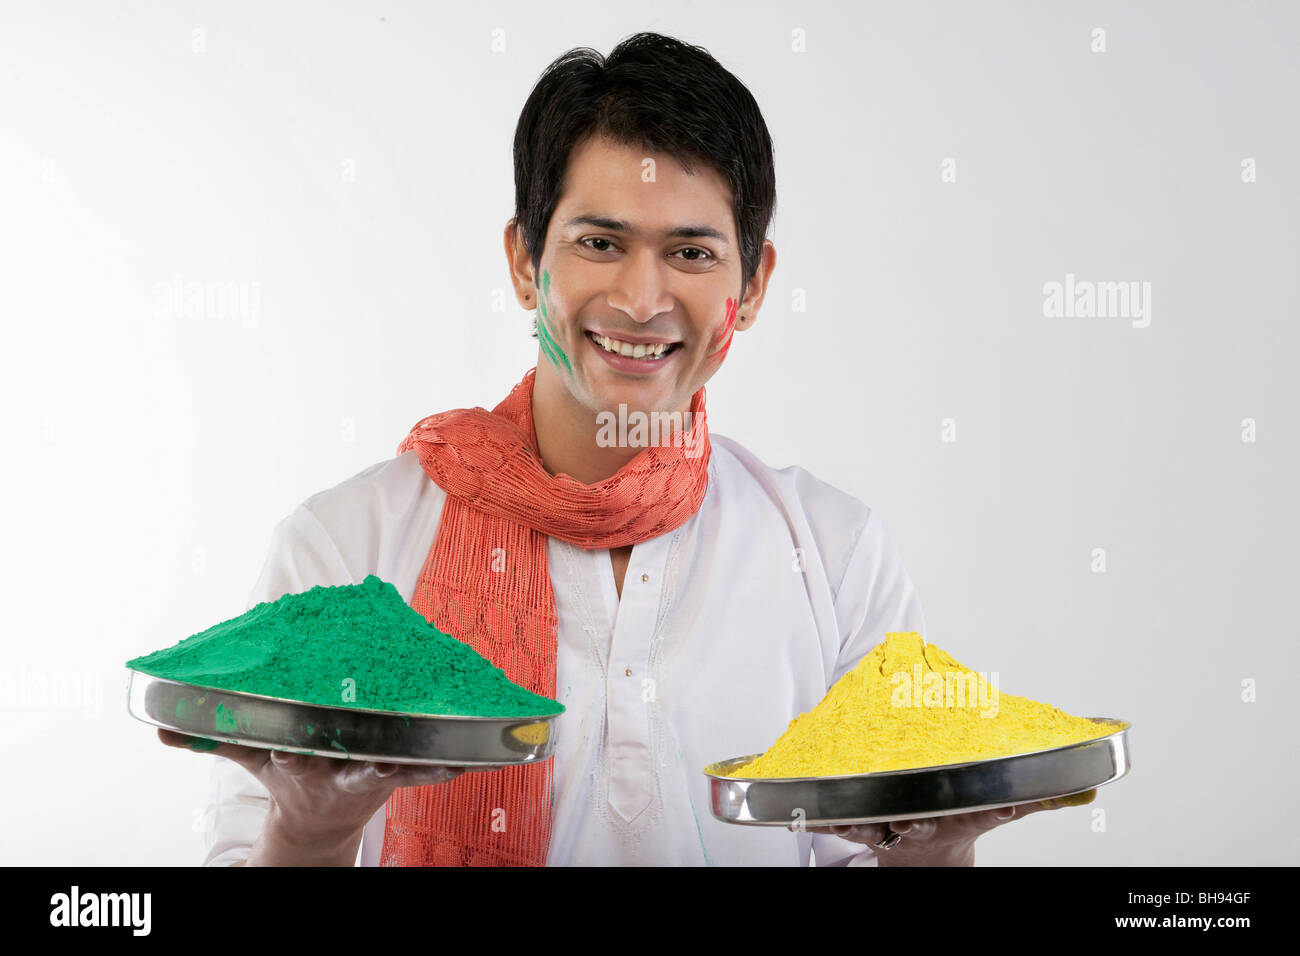 Man holding trays with colours Stock Photo